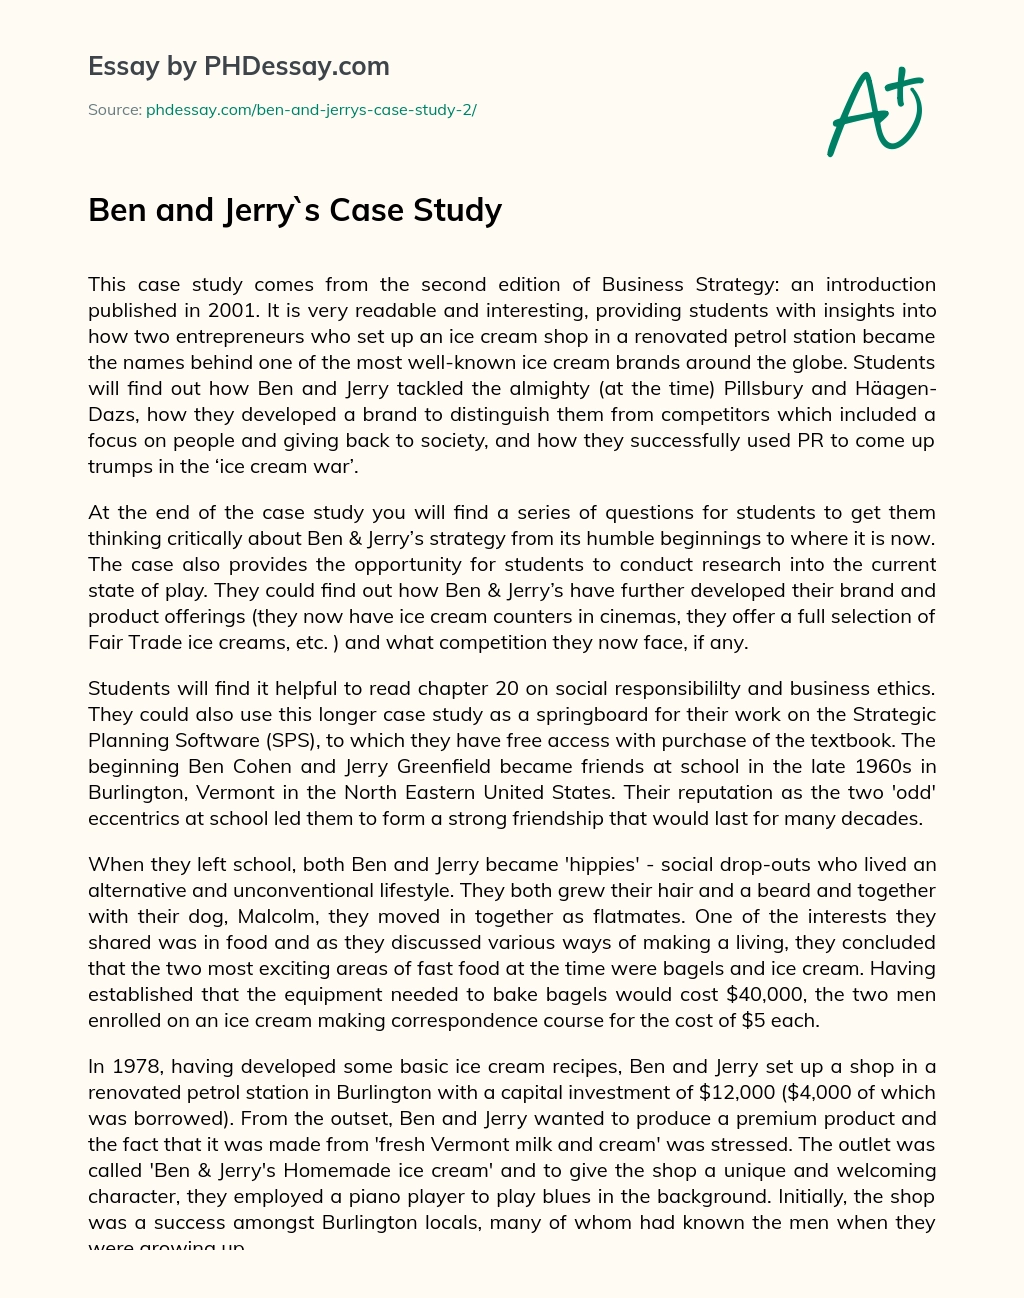 Ben and Jerry`s Case Study essay